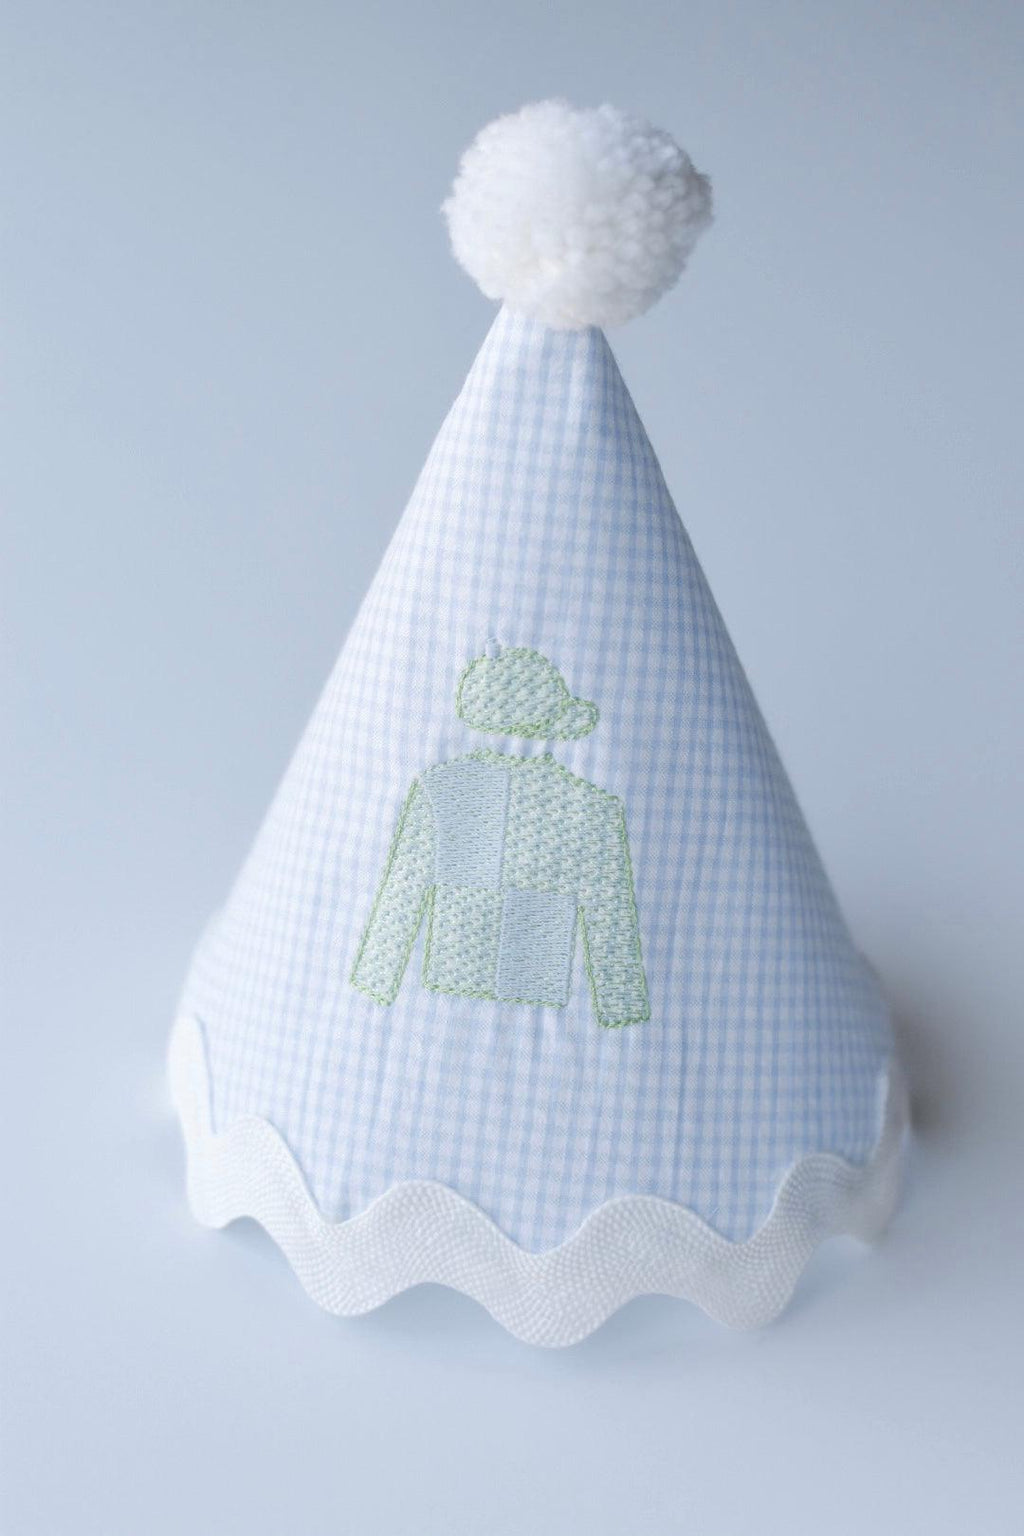 Party Hat - Little Blue Check | Nashville Bow Co. - Classic Hair Bows, Bow Ties, Basket Bows, Pacifier Clips, Wreath Sashes, Swaddle Bows. Classic Southern Charm.